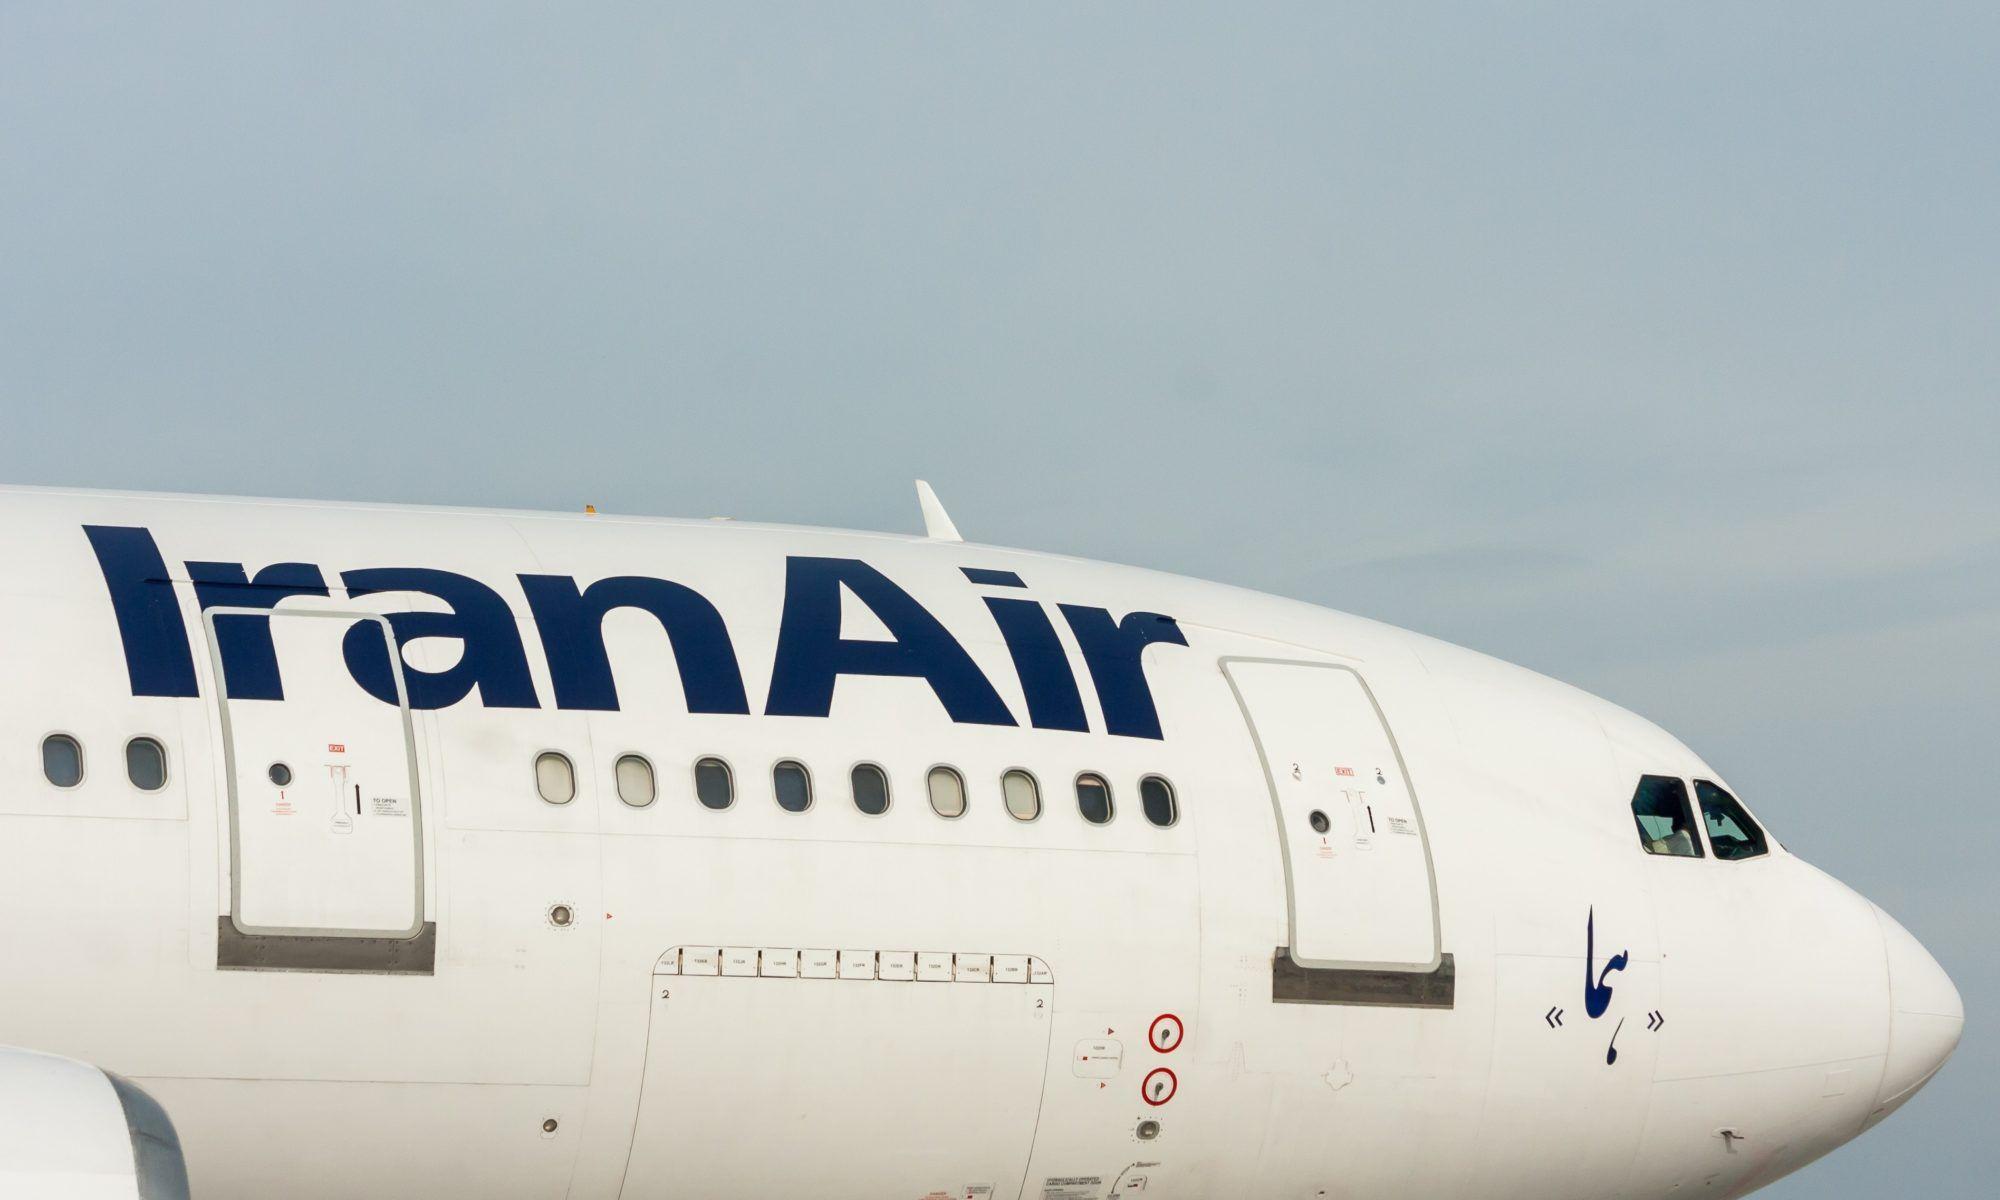 Airline Swan Logo - Airline Insight: IranAir – Blue Swan Daily